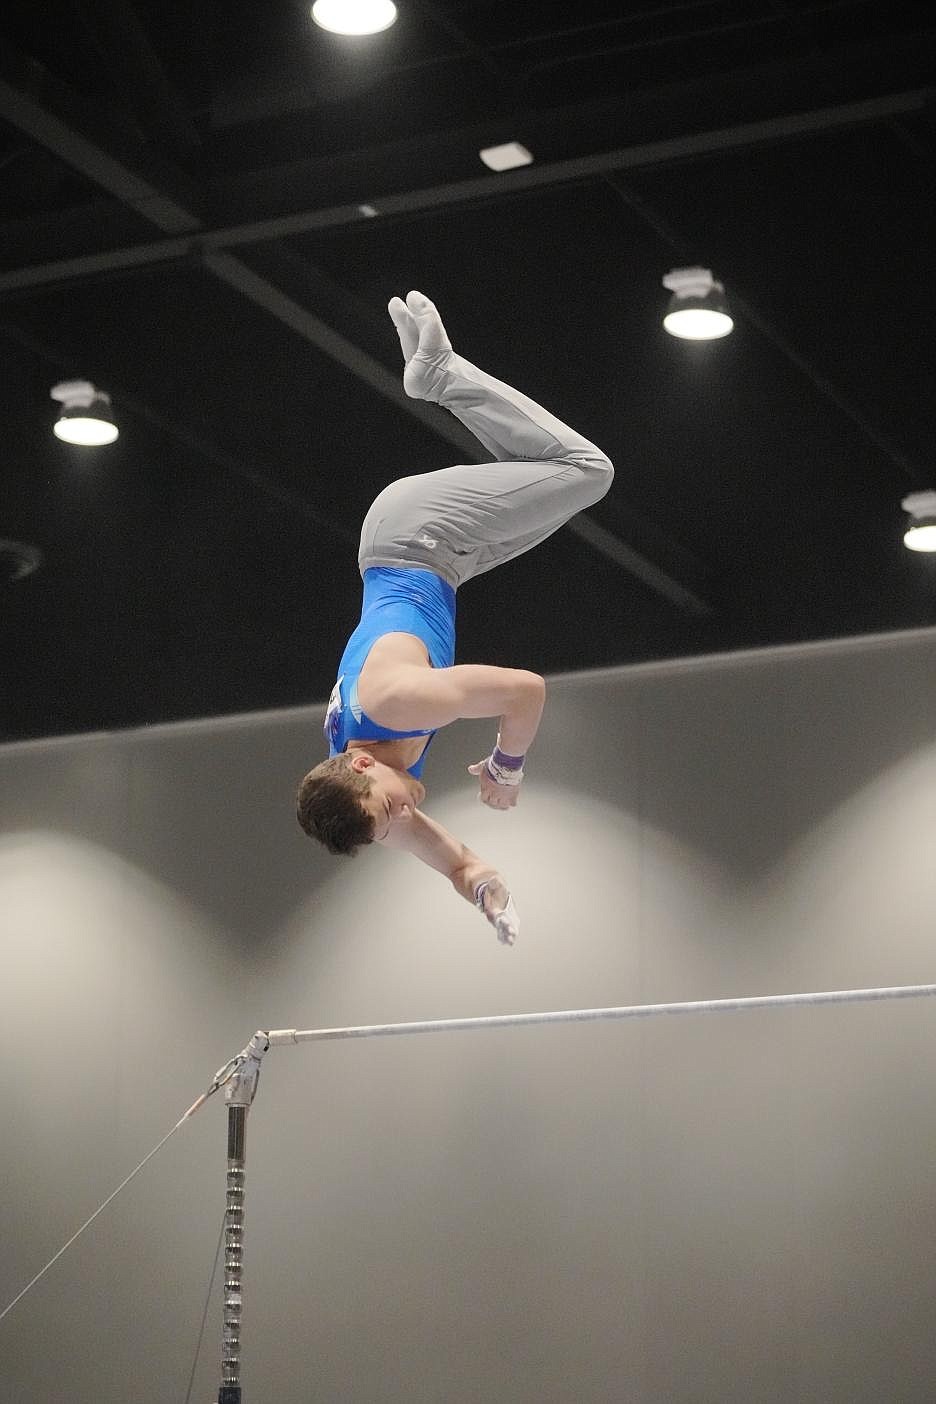 Courtesy photo
Avant Coeur Gymnastics Level 10 Dan Fryling competed against Level 10s from all over the country in Oklahoma City at the men’s national championships. Dan tied for 7th on Floor with a 12.650 and had a high of 11.600 on Vault.